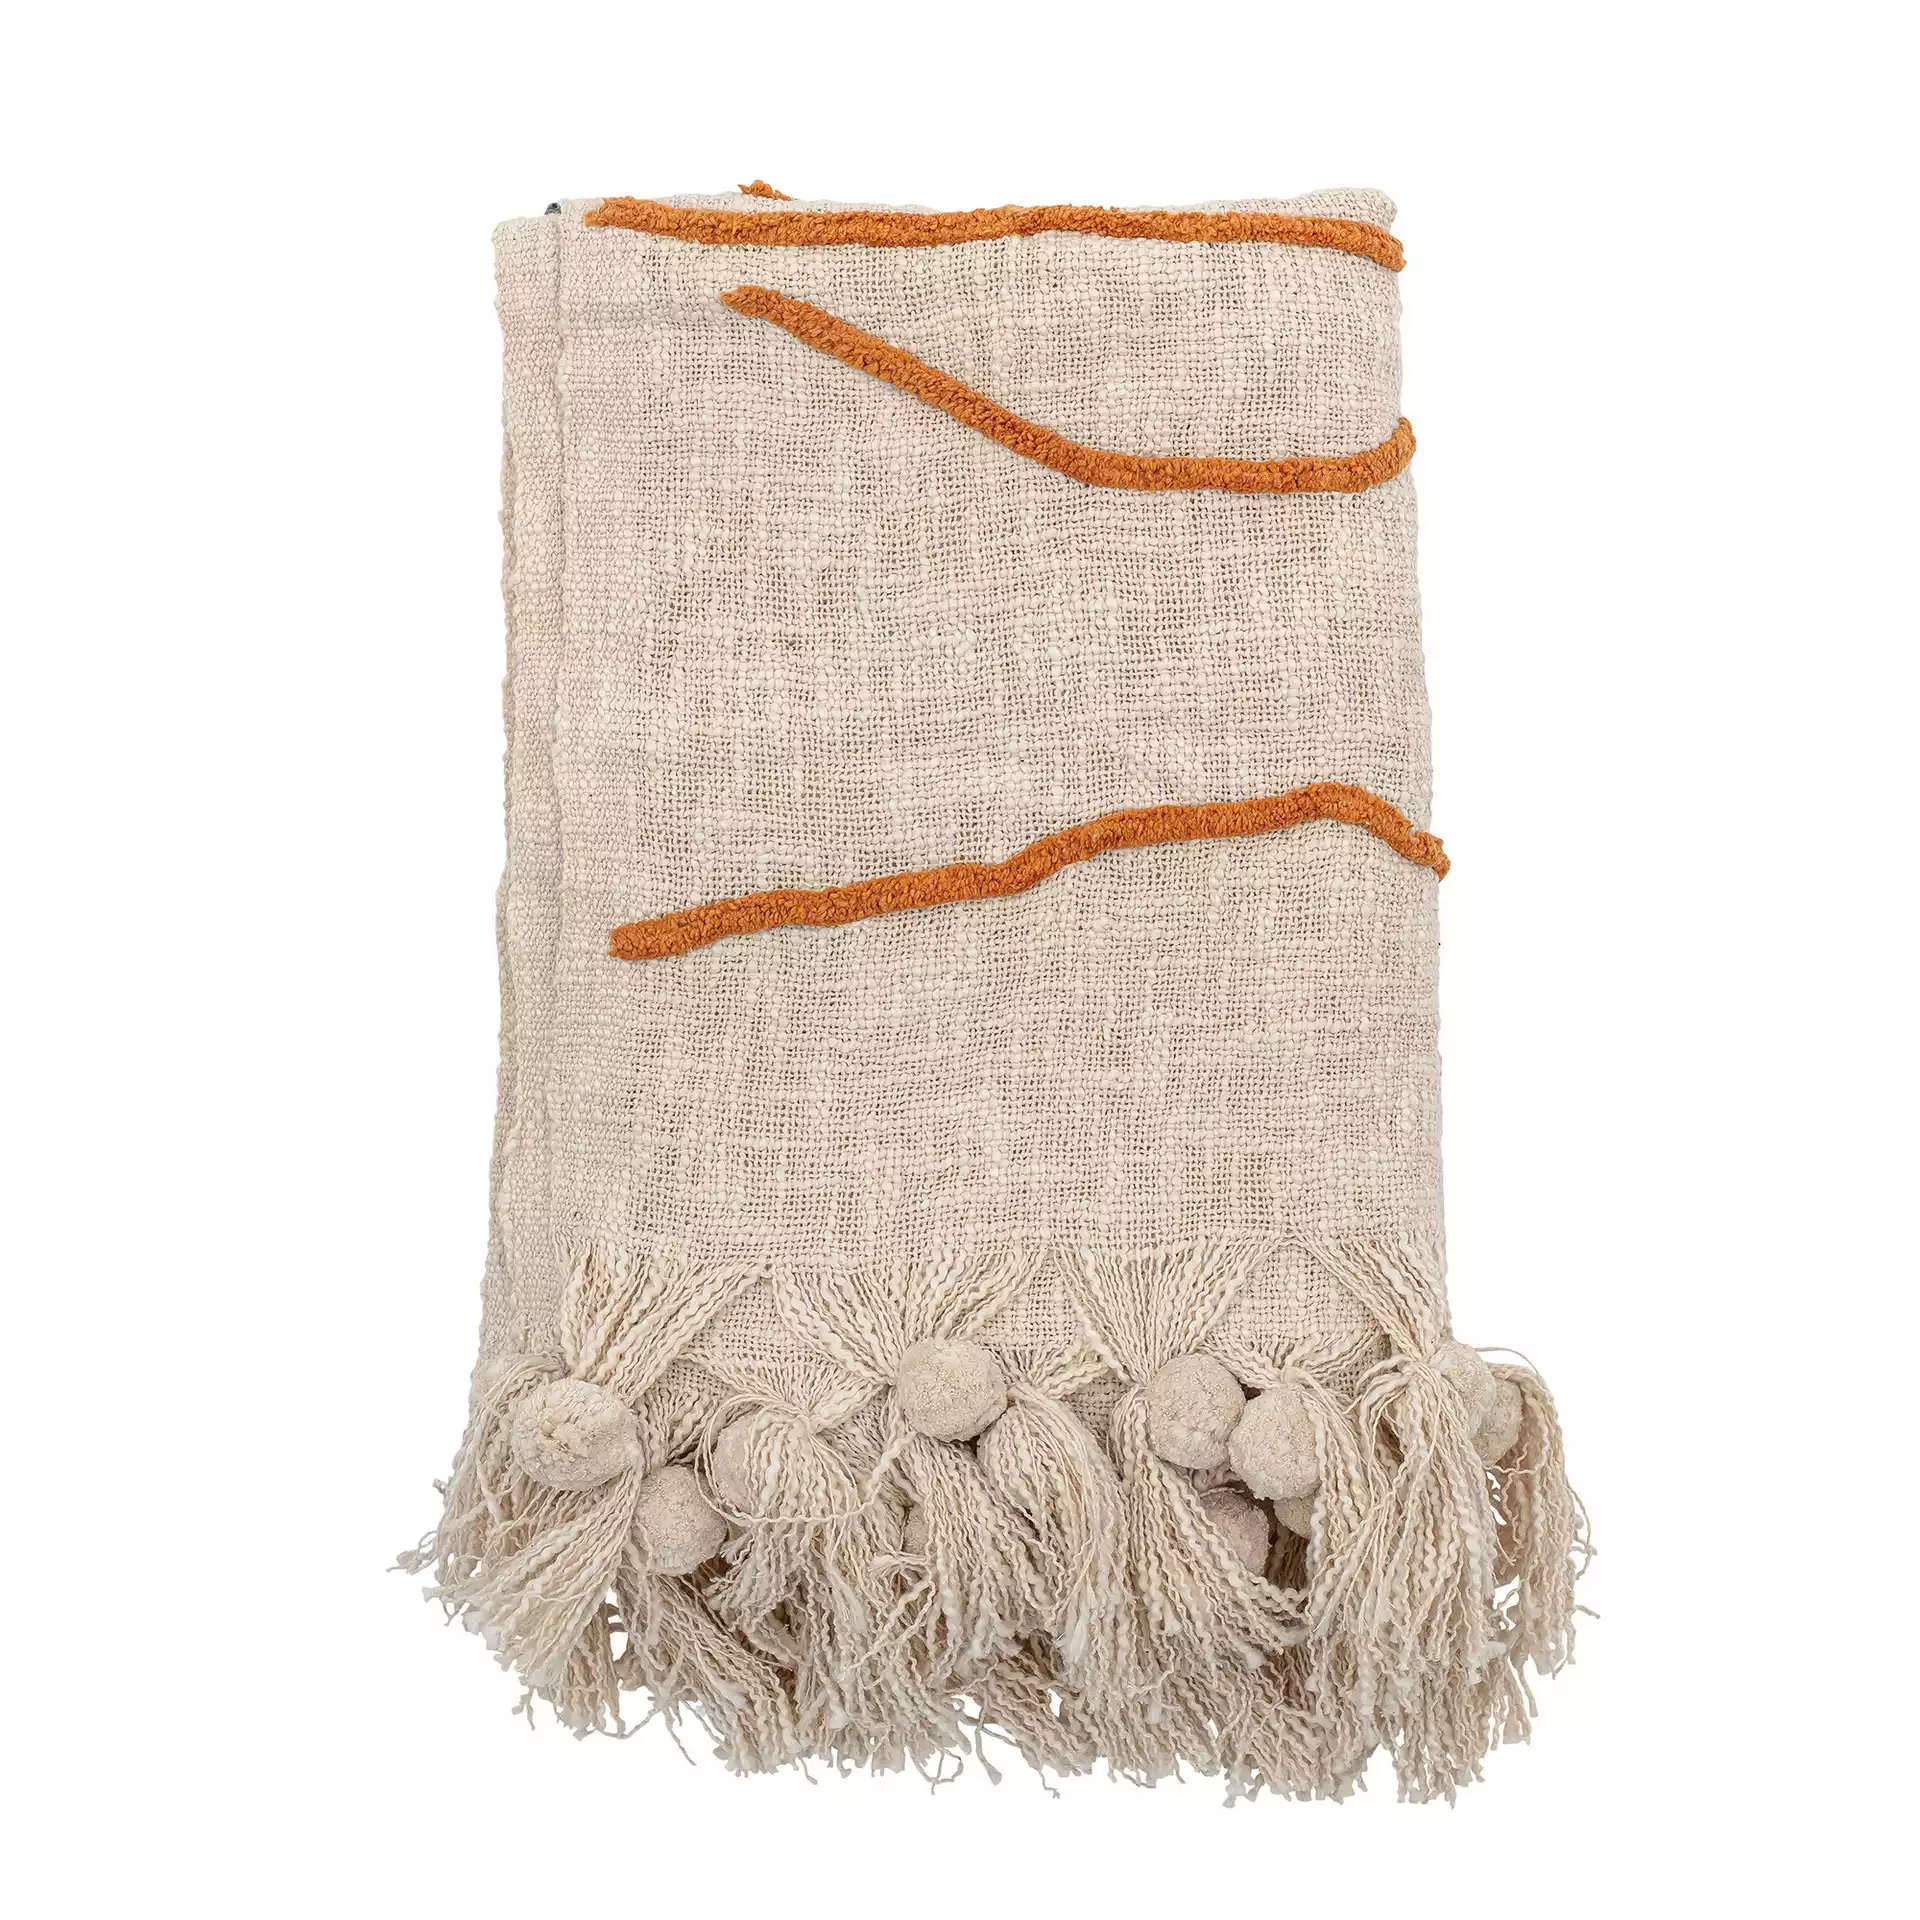 Cotton Embroidered Throw Blanket with Tassels, Cream